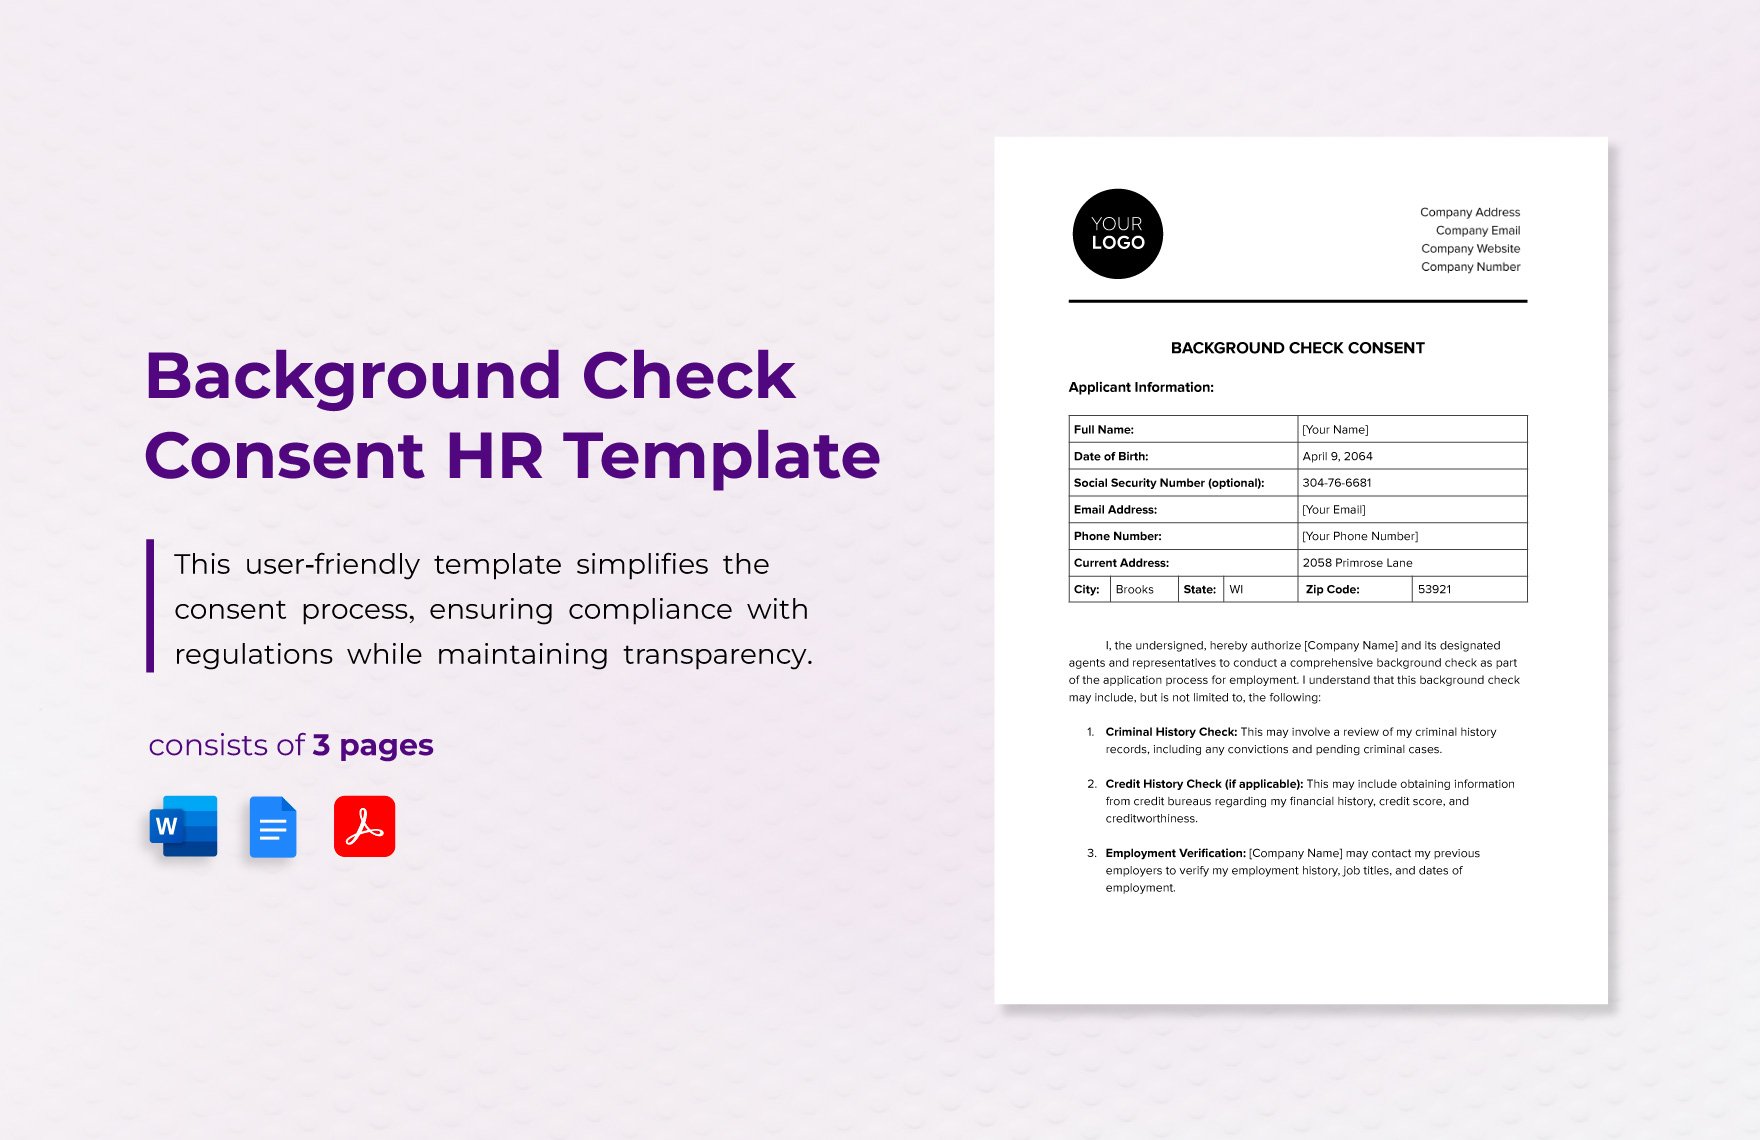 Background Check Consent HR Template